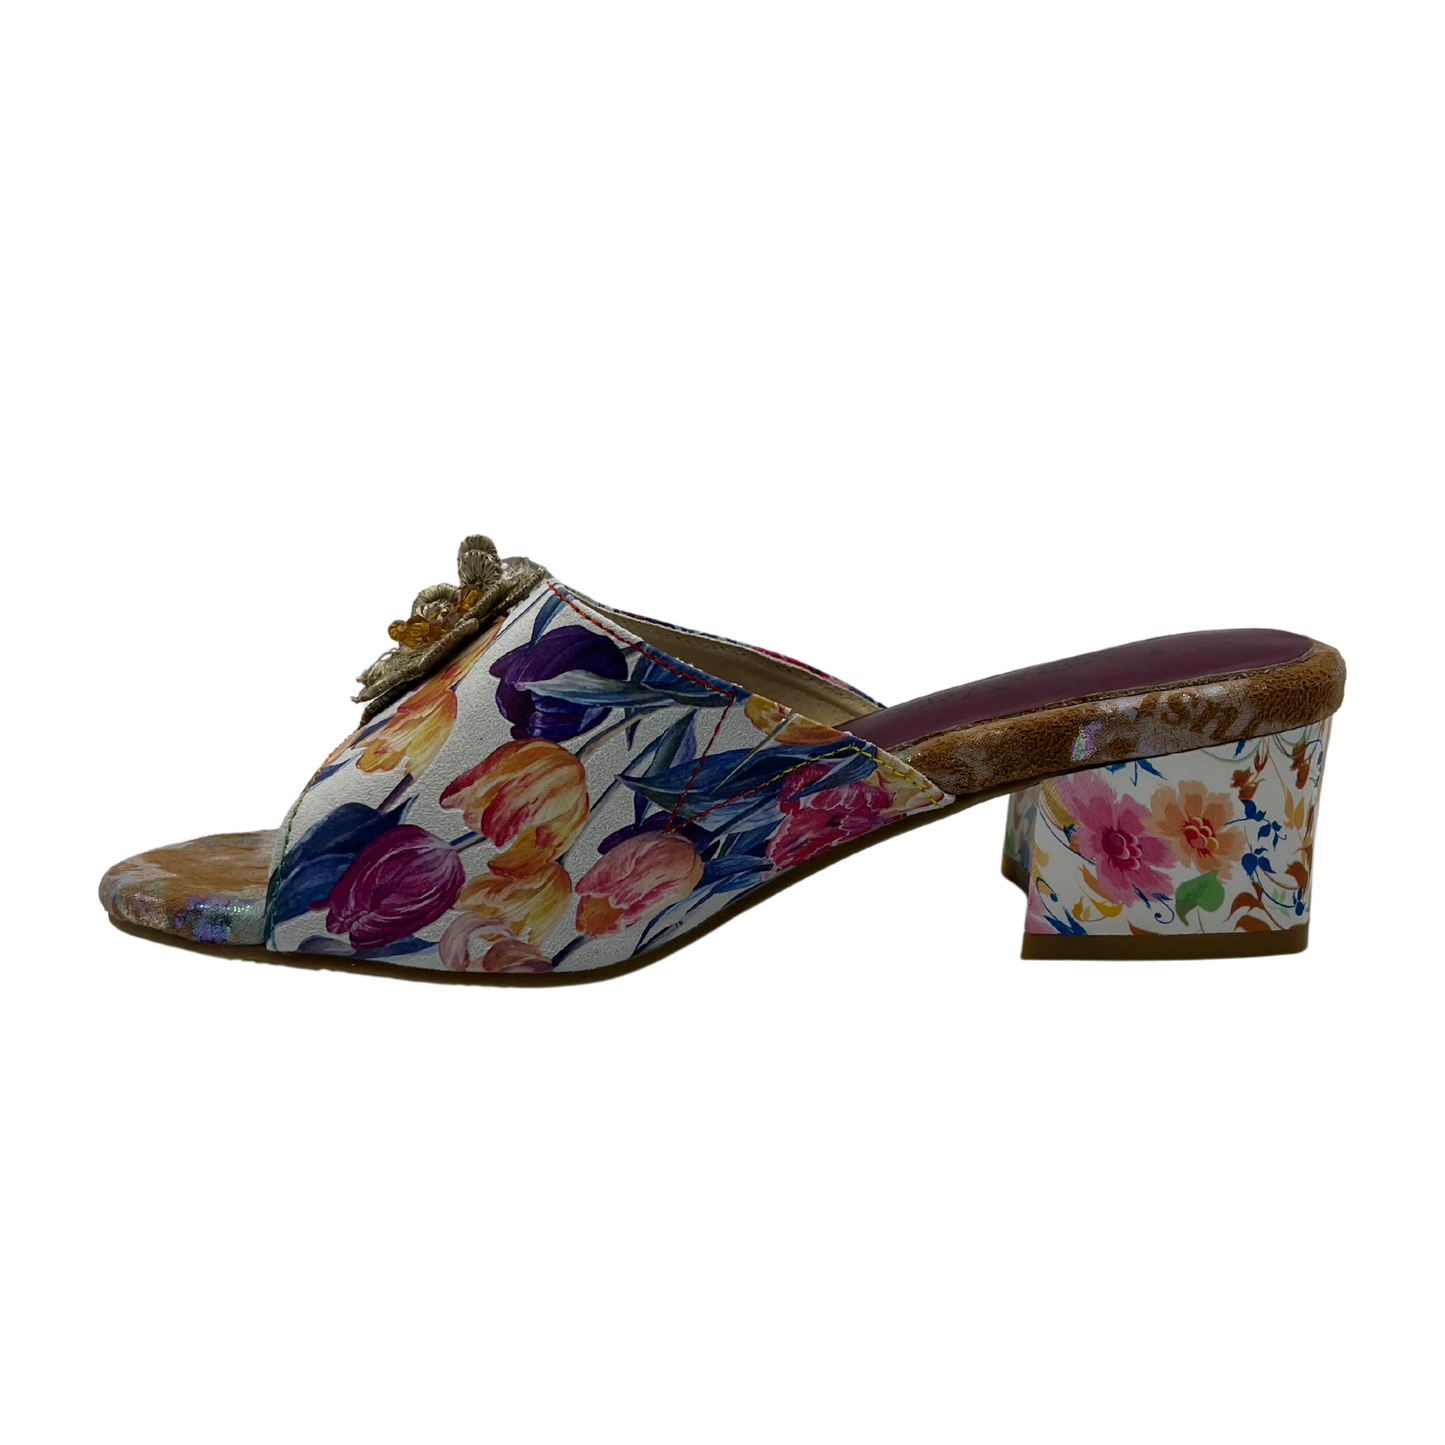 Left facing view of floral slip on sandal with flower accents on upper. Open toe and block heel